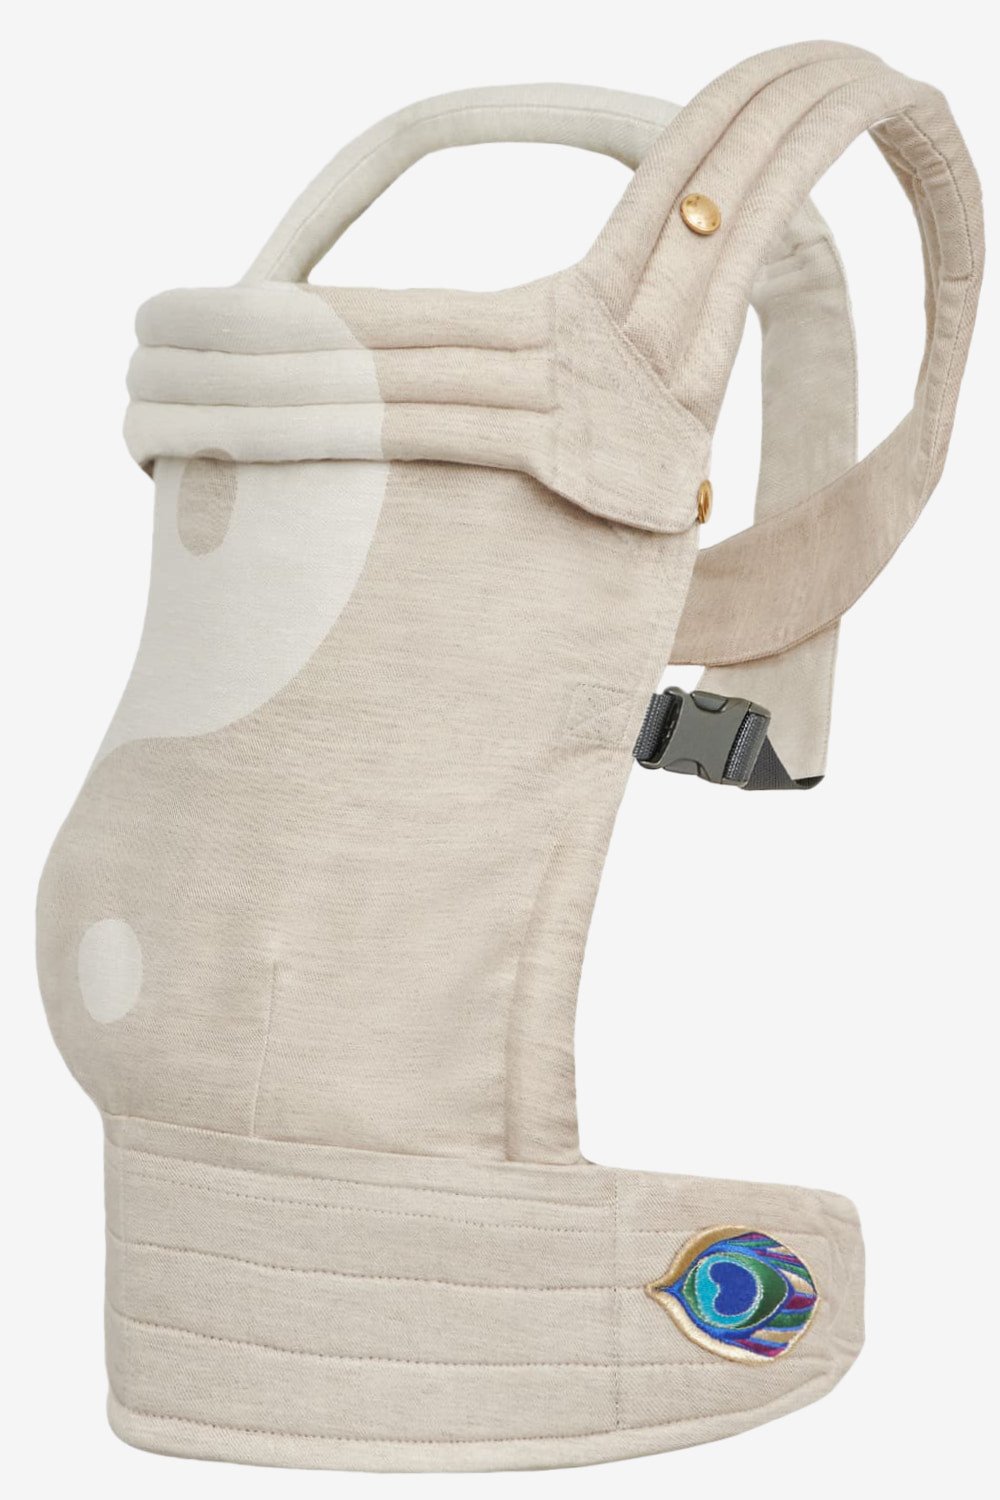 Beige and white yin yang baby carrier in a linen blend